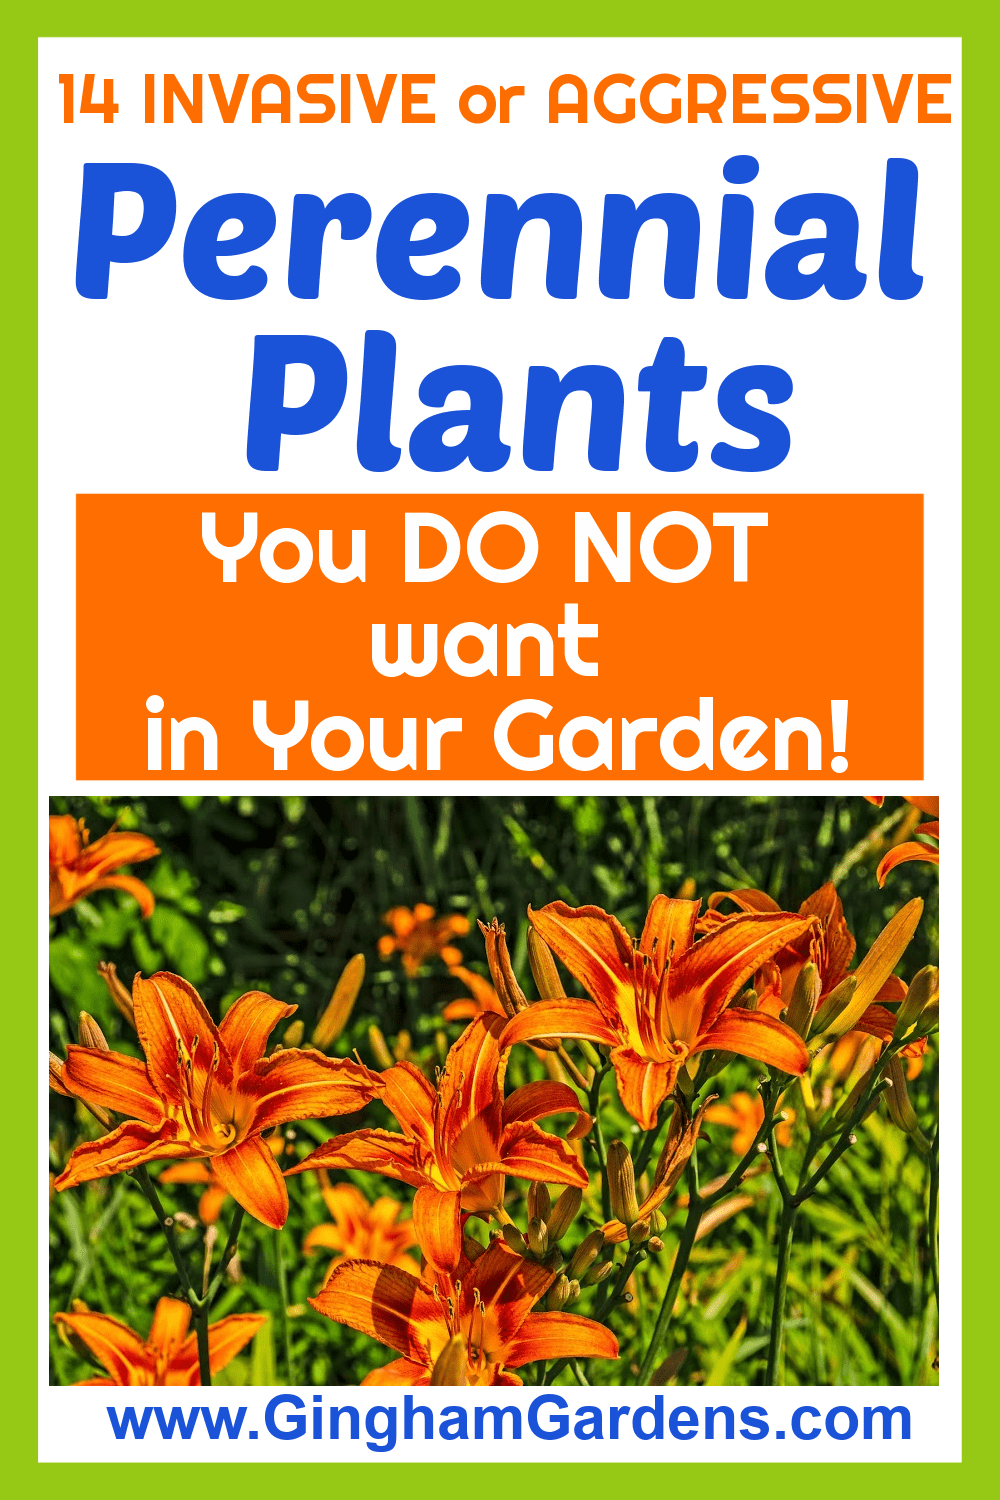 Image of Ditch Lilies with Text Overlay - Perennial Plants You do Not want in your gardens